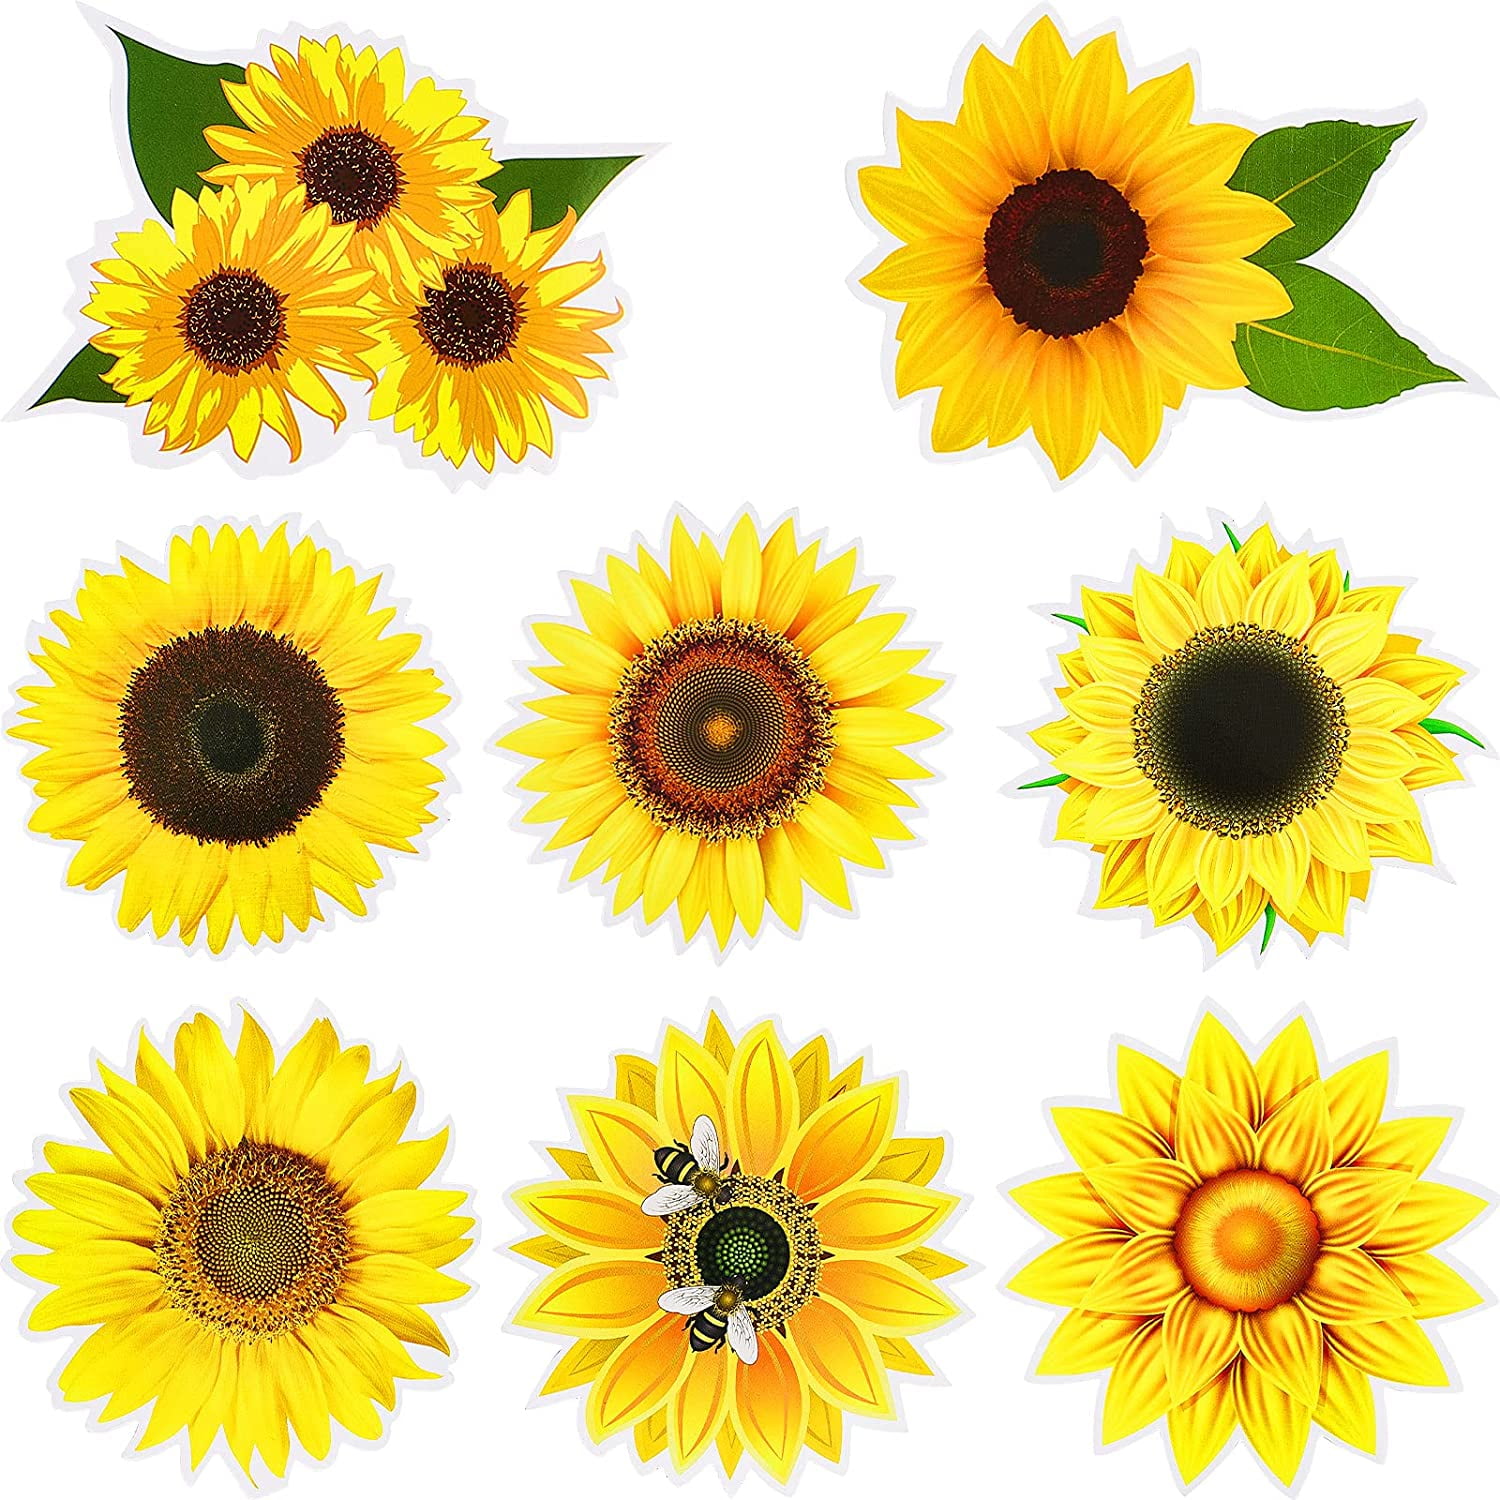 Car Laptop Vinyl Decal Sticker for Wall iPhone iPad Sunflower Double